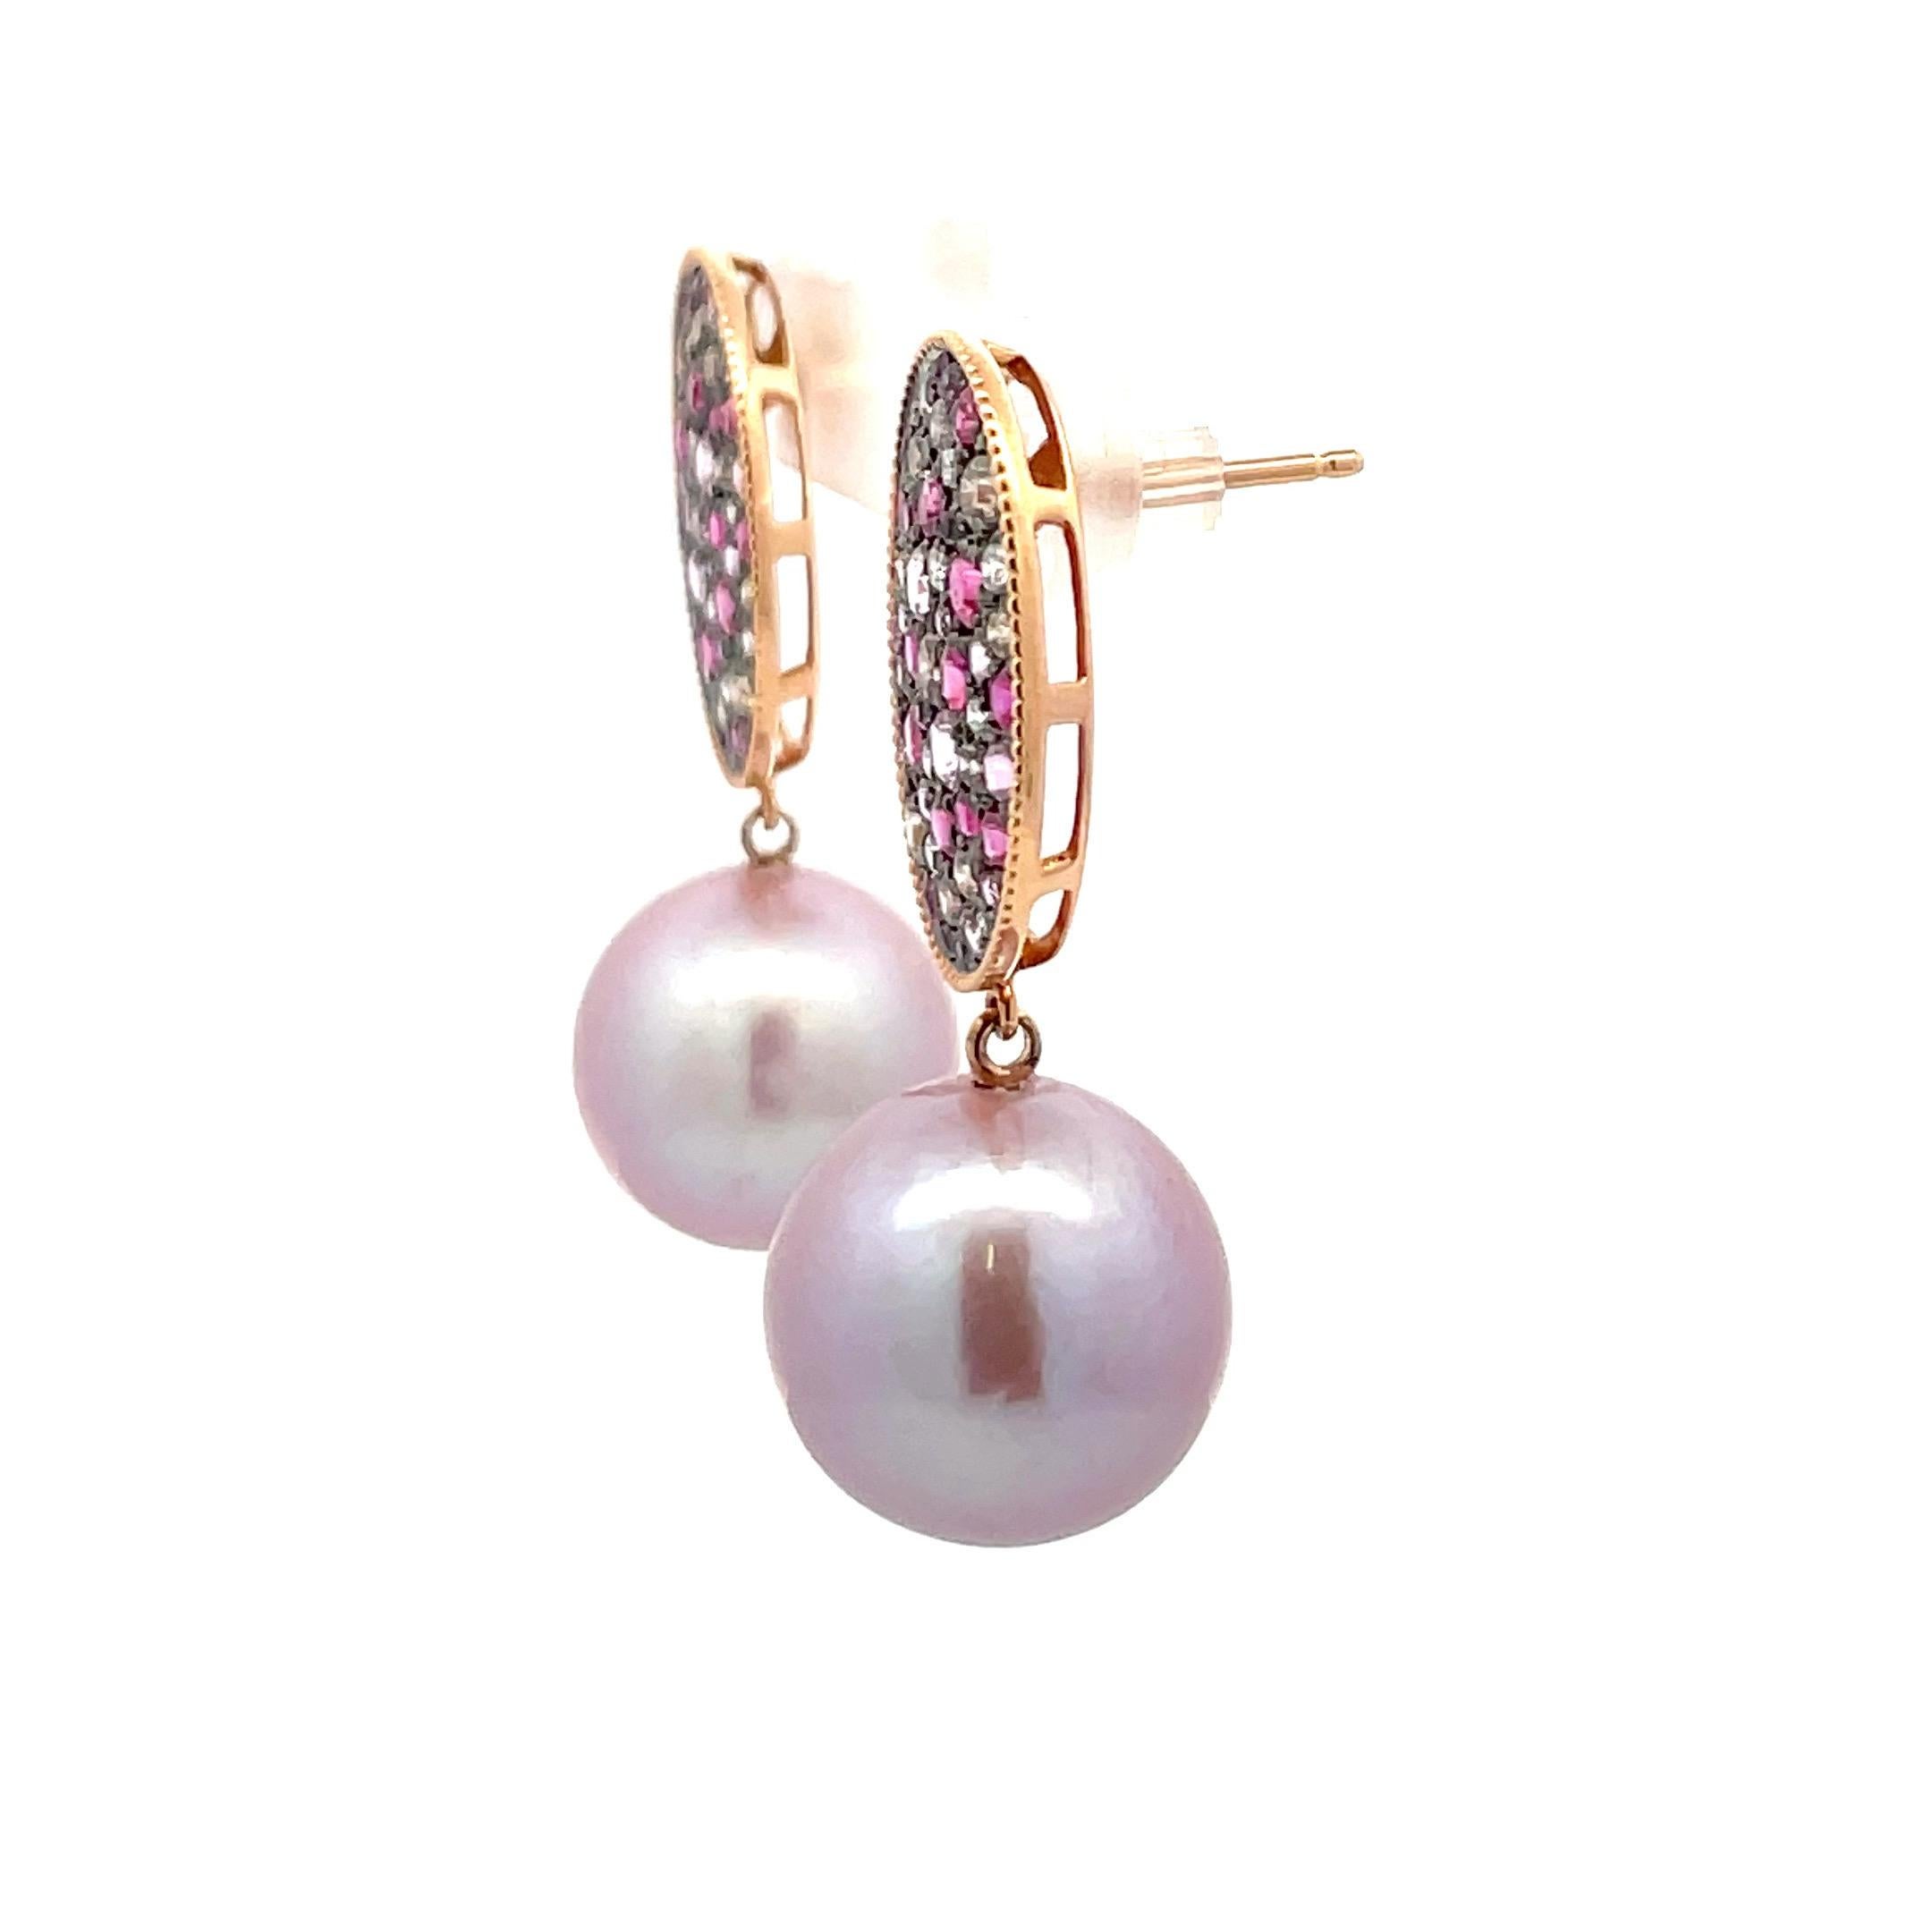 18 Karat Rose Gold drop earrings featuring 32 pink Sapphires weighing 0.85 Carats and 74 white & champagne color diamonds weighing 2.20 Carats with two pink Freshwater Pearls measuring 14-15 MM.

Pearls earrings can be changed to Tahitian, Pink,